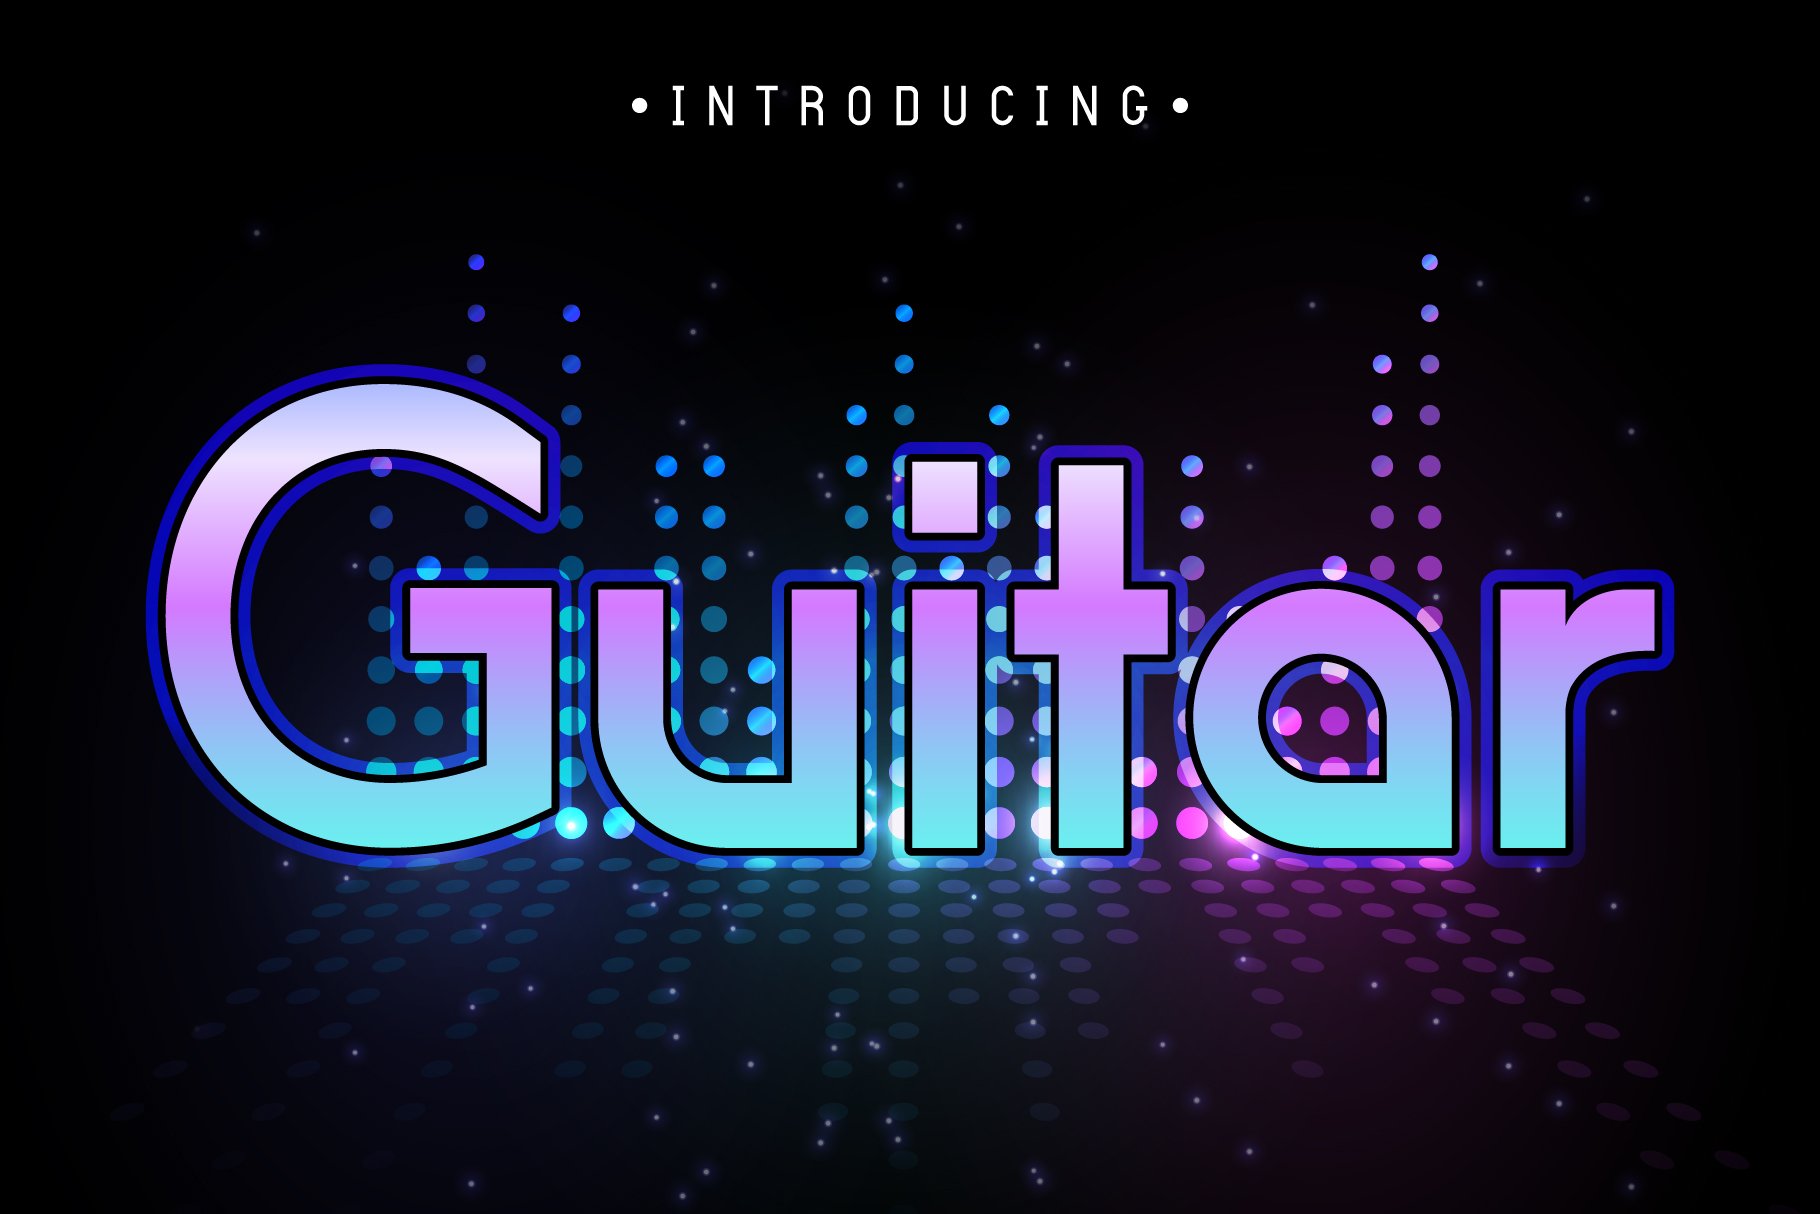 Guitar Fonts cover image.